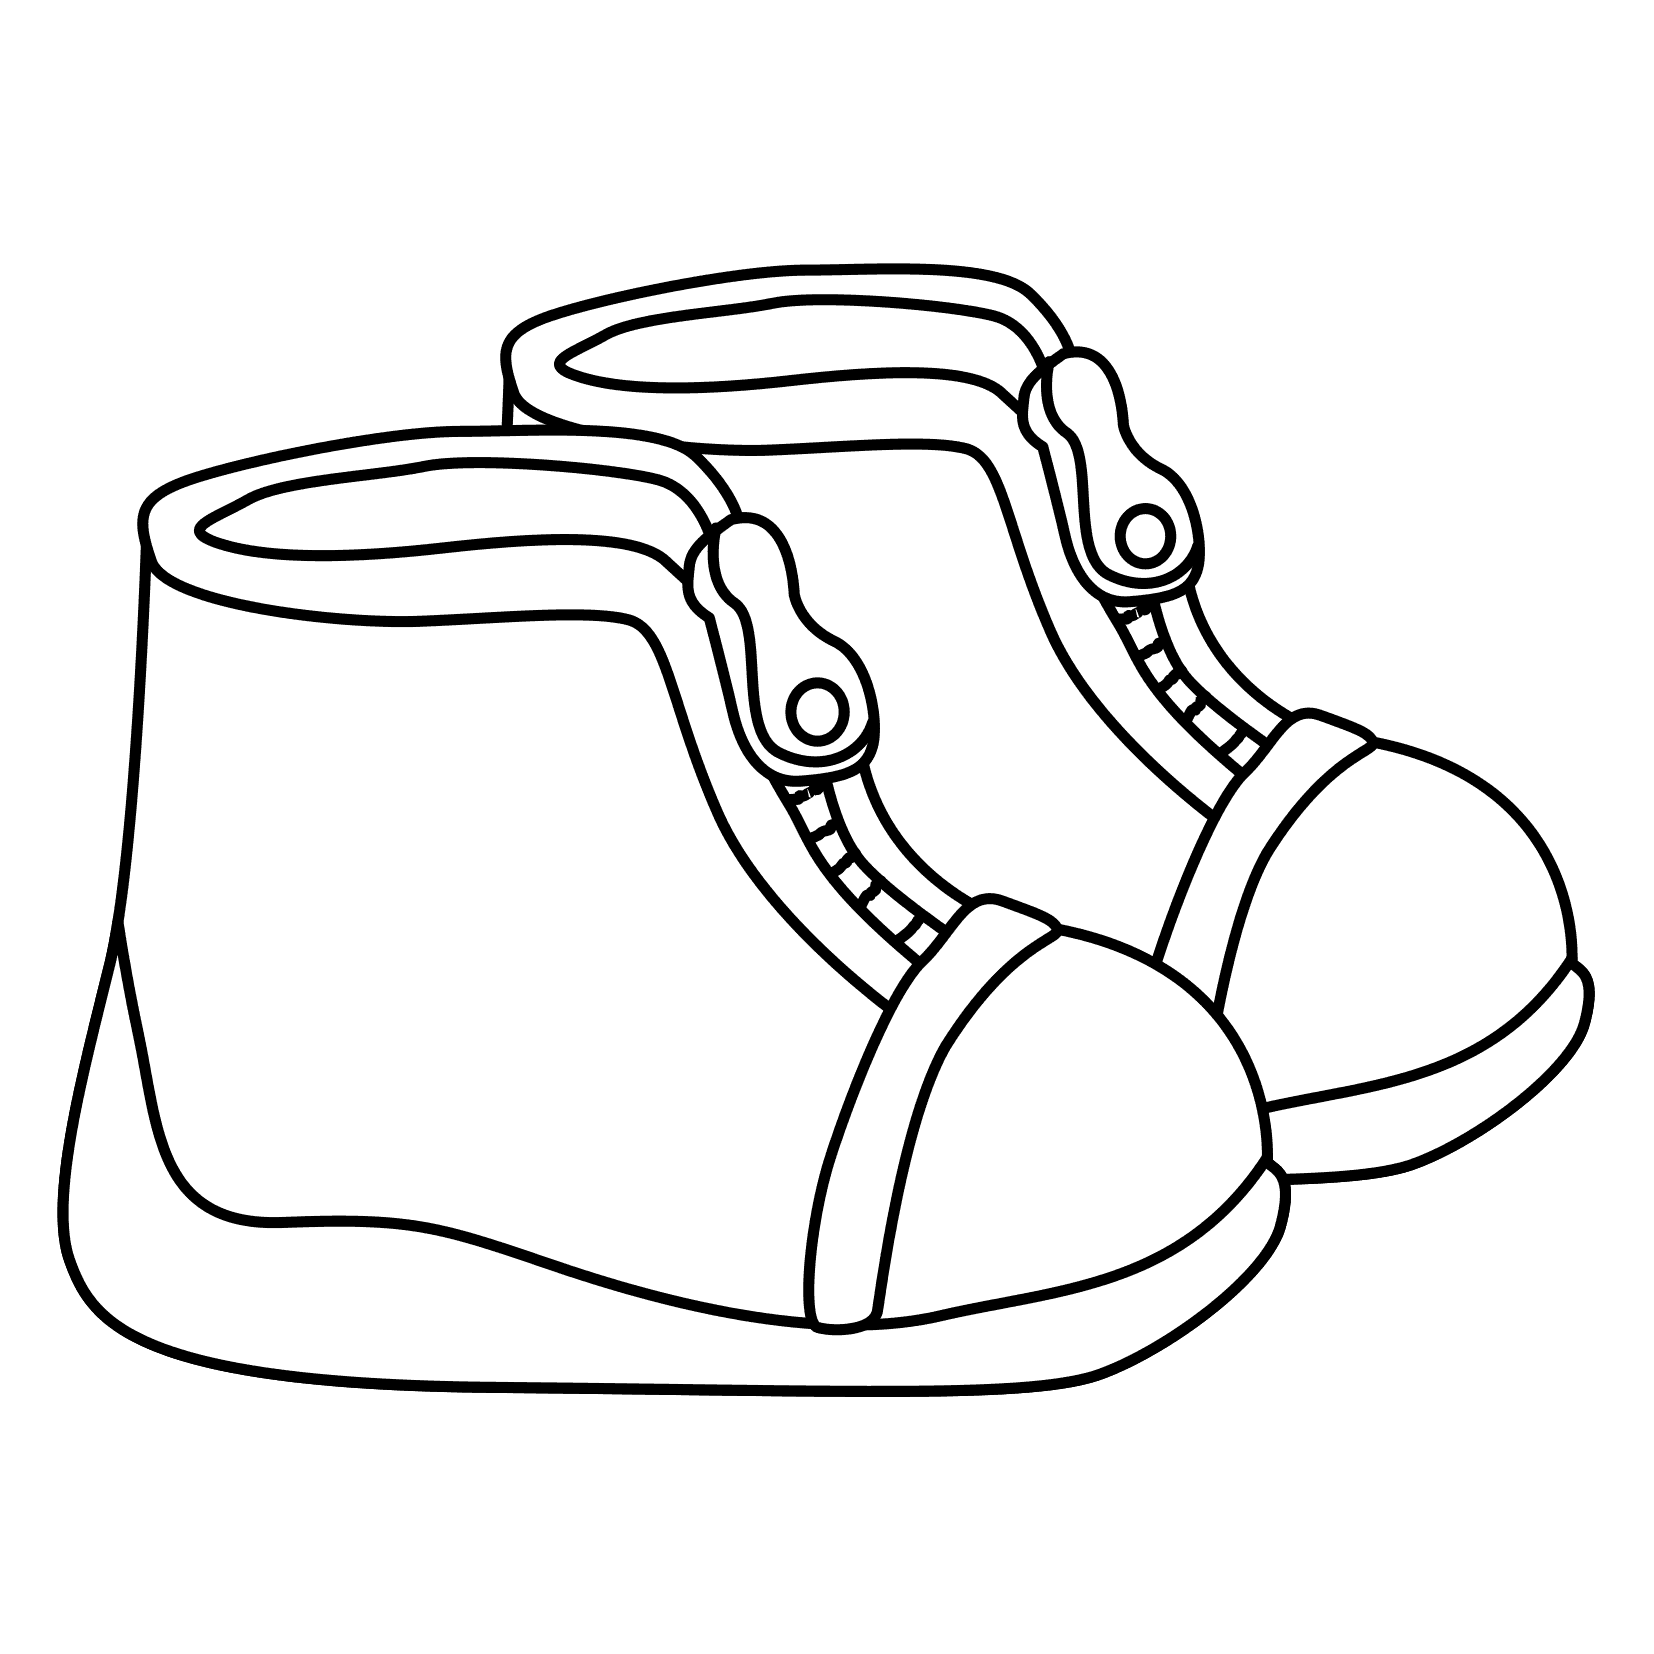 coloring pages boots dora coloring lots of dora coloring pages and printables coloring boots pages 